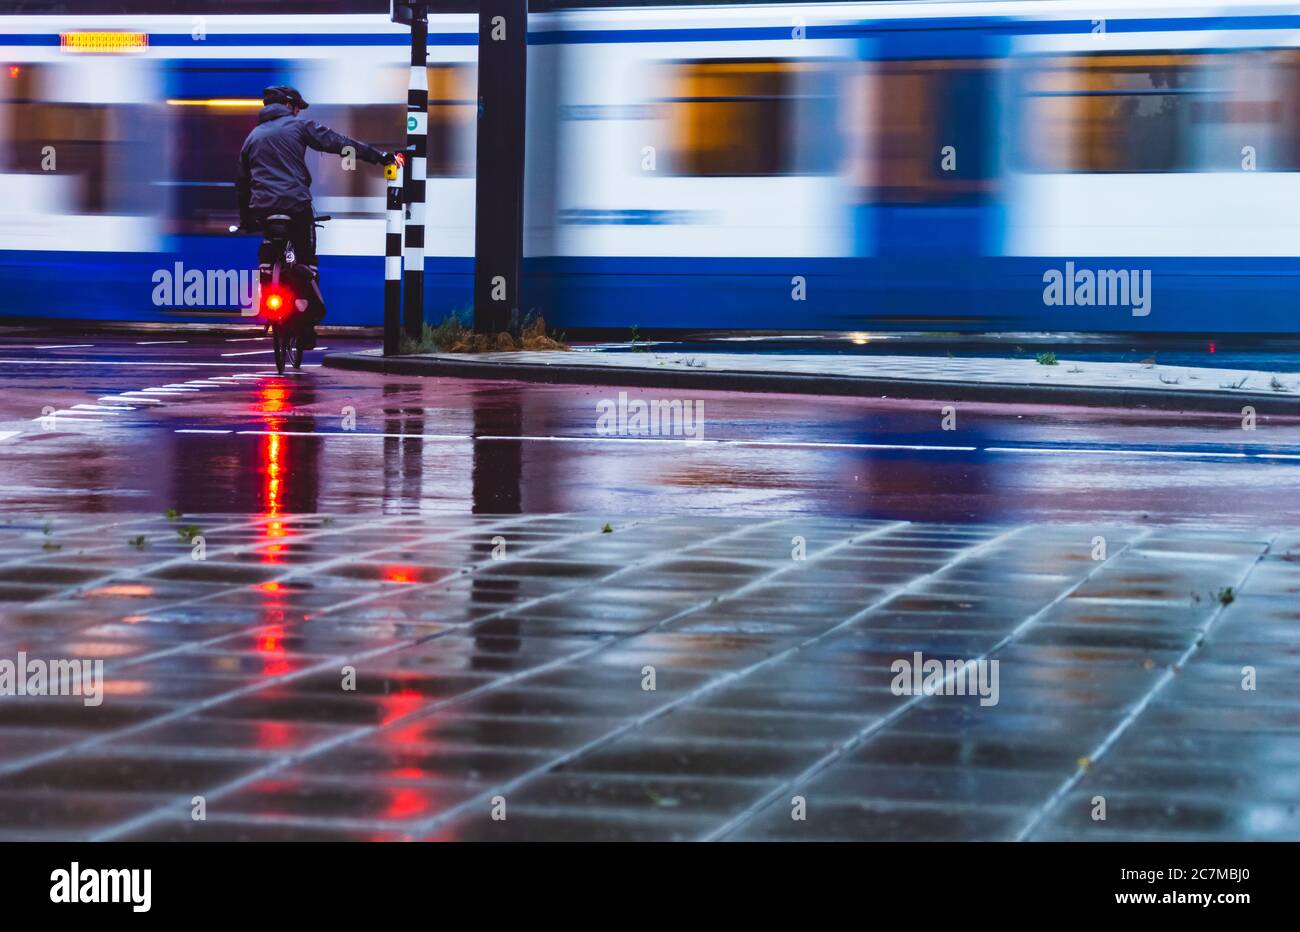 AMSTERDAM, THE NETHERLANDS JULY 9, 2020: Cyclist in the rain with a helmet on waiting at the traffic sign while a tram is passing by. Low angle and mo Stock Photo